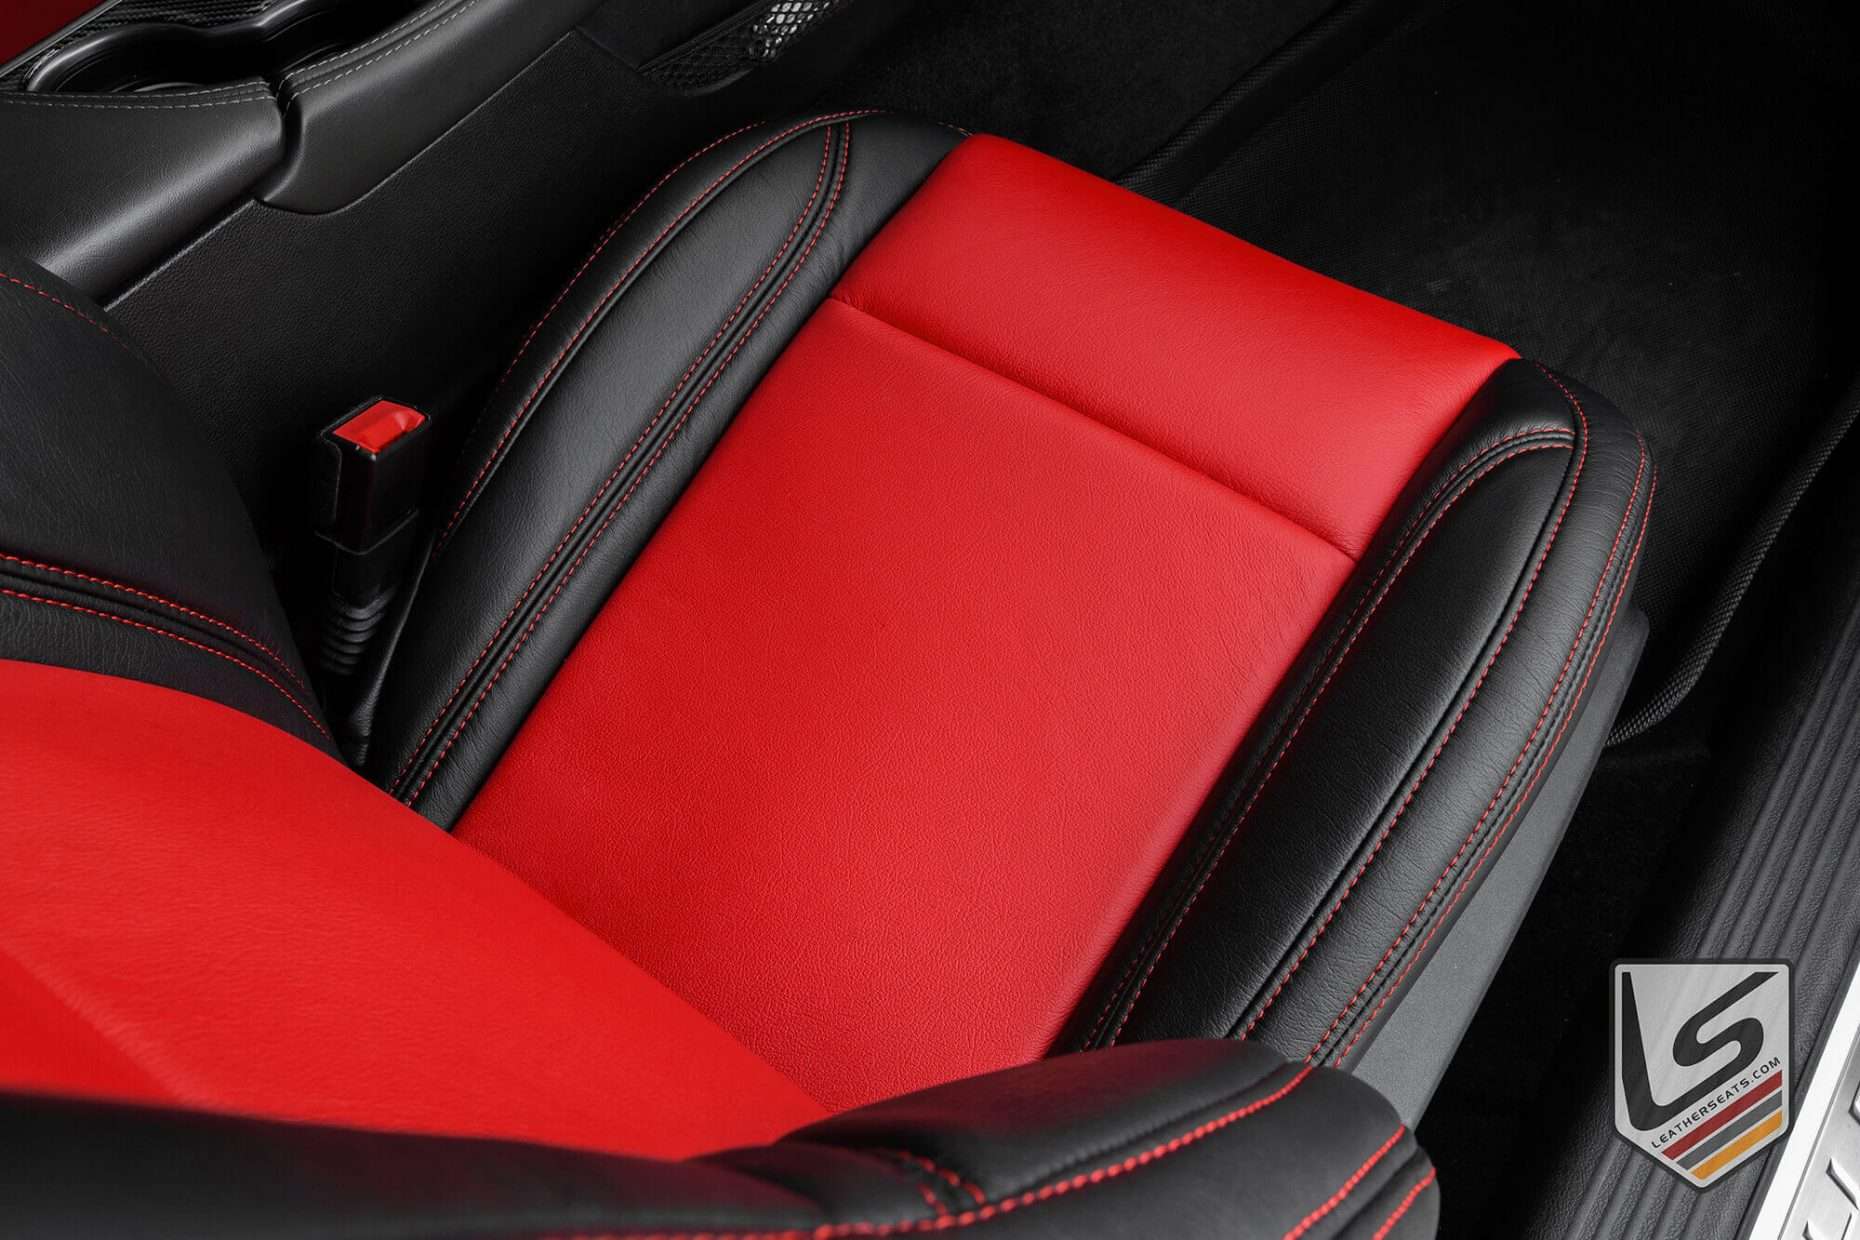 Black and Bright Red leather seat cushion with Bright Red contrasting stitching